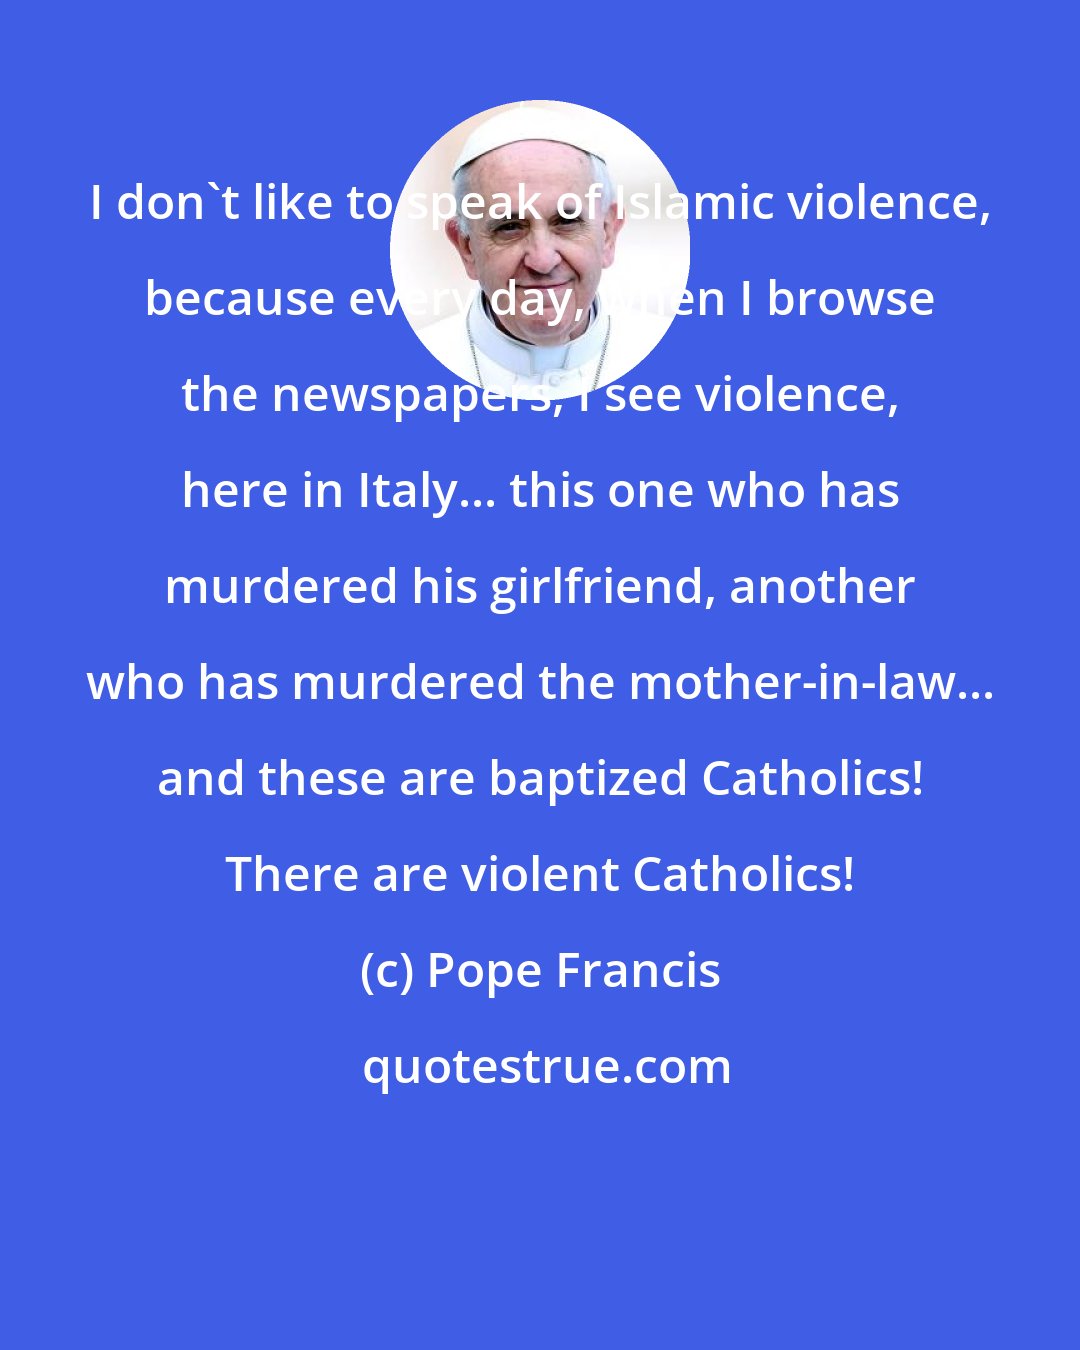 Pope Francis: I don't like to speak of Islamic violence, because every day, when I browse the newspapers, I see violence, here in Italy... this one who has murdered his girlfriend, another who has murdered the mother-in-law... and these are baptized Catholics! There are violent Catholics!